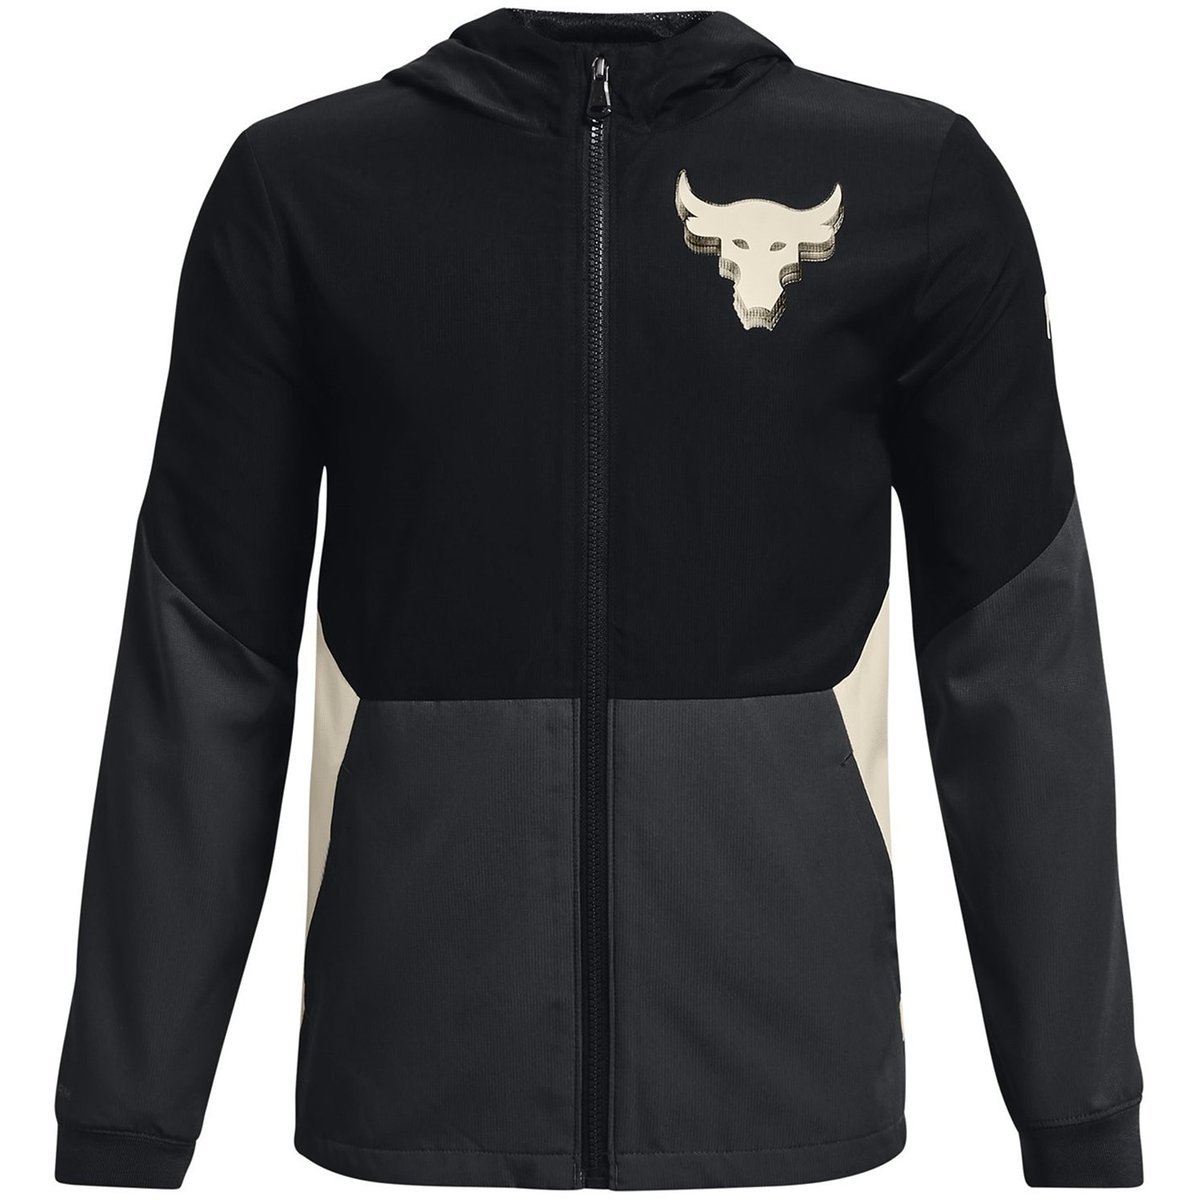 Under Armour Rival Terry Hoodie Junior Boys